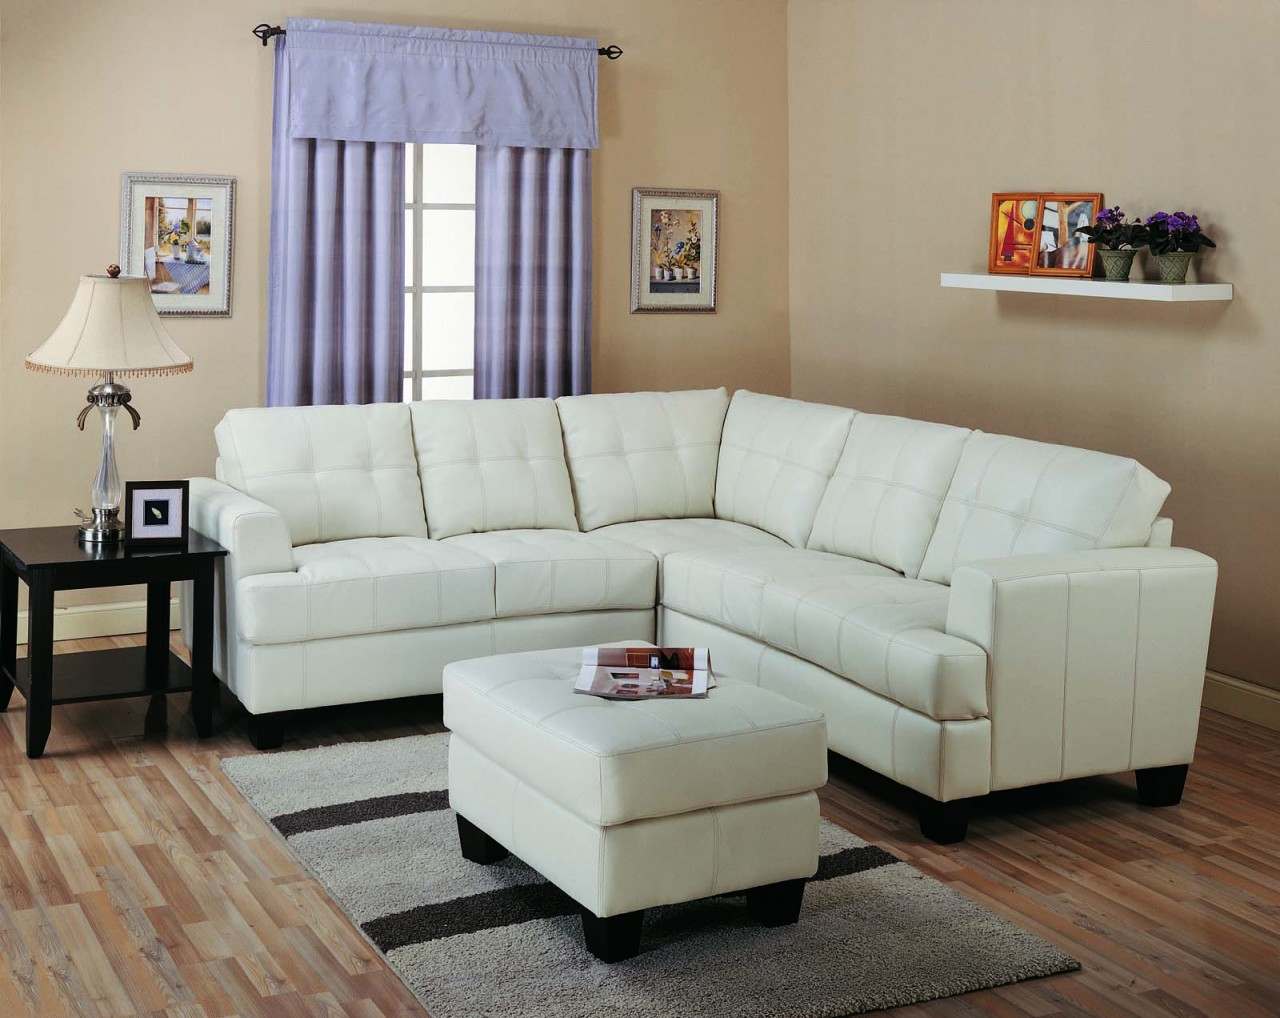 Sectionals For Small Living Room
 Types of Best Small Sectional Couches for Small Living